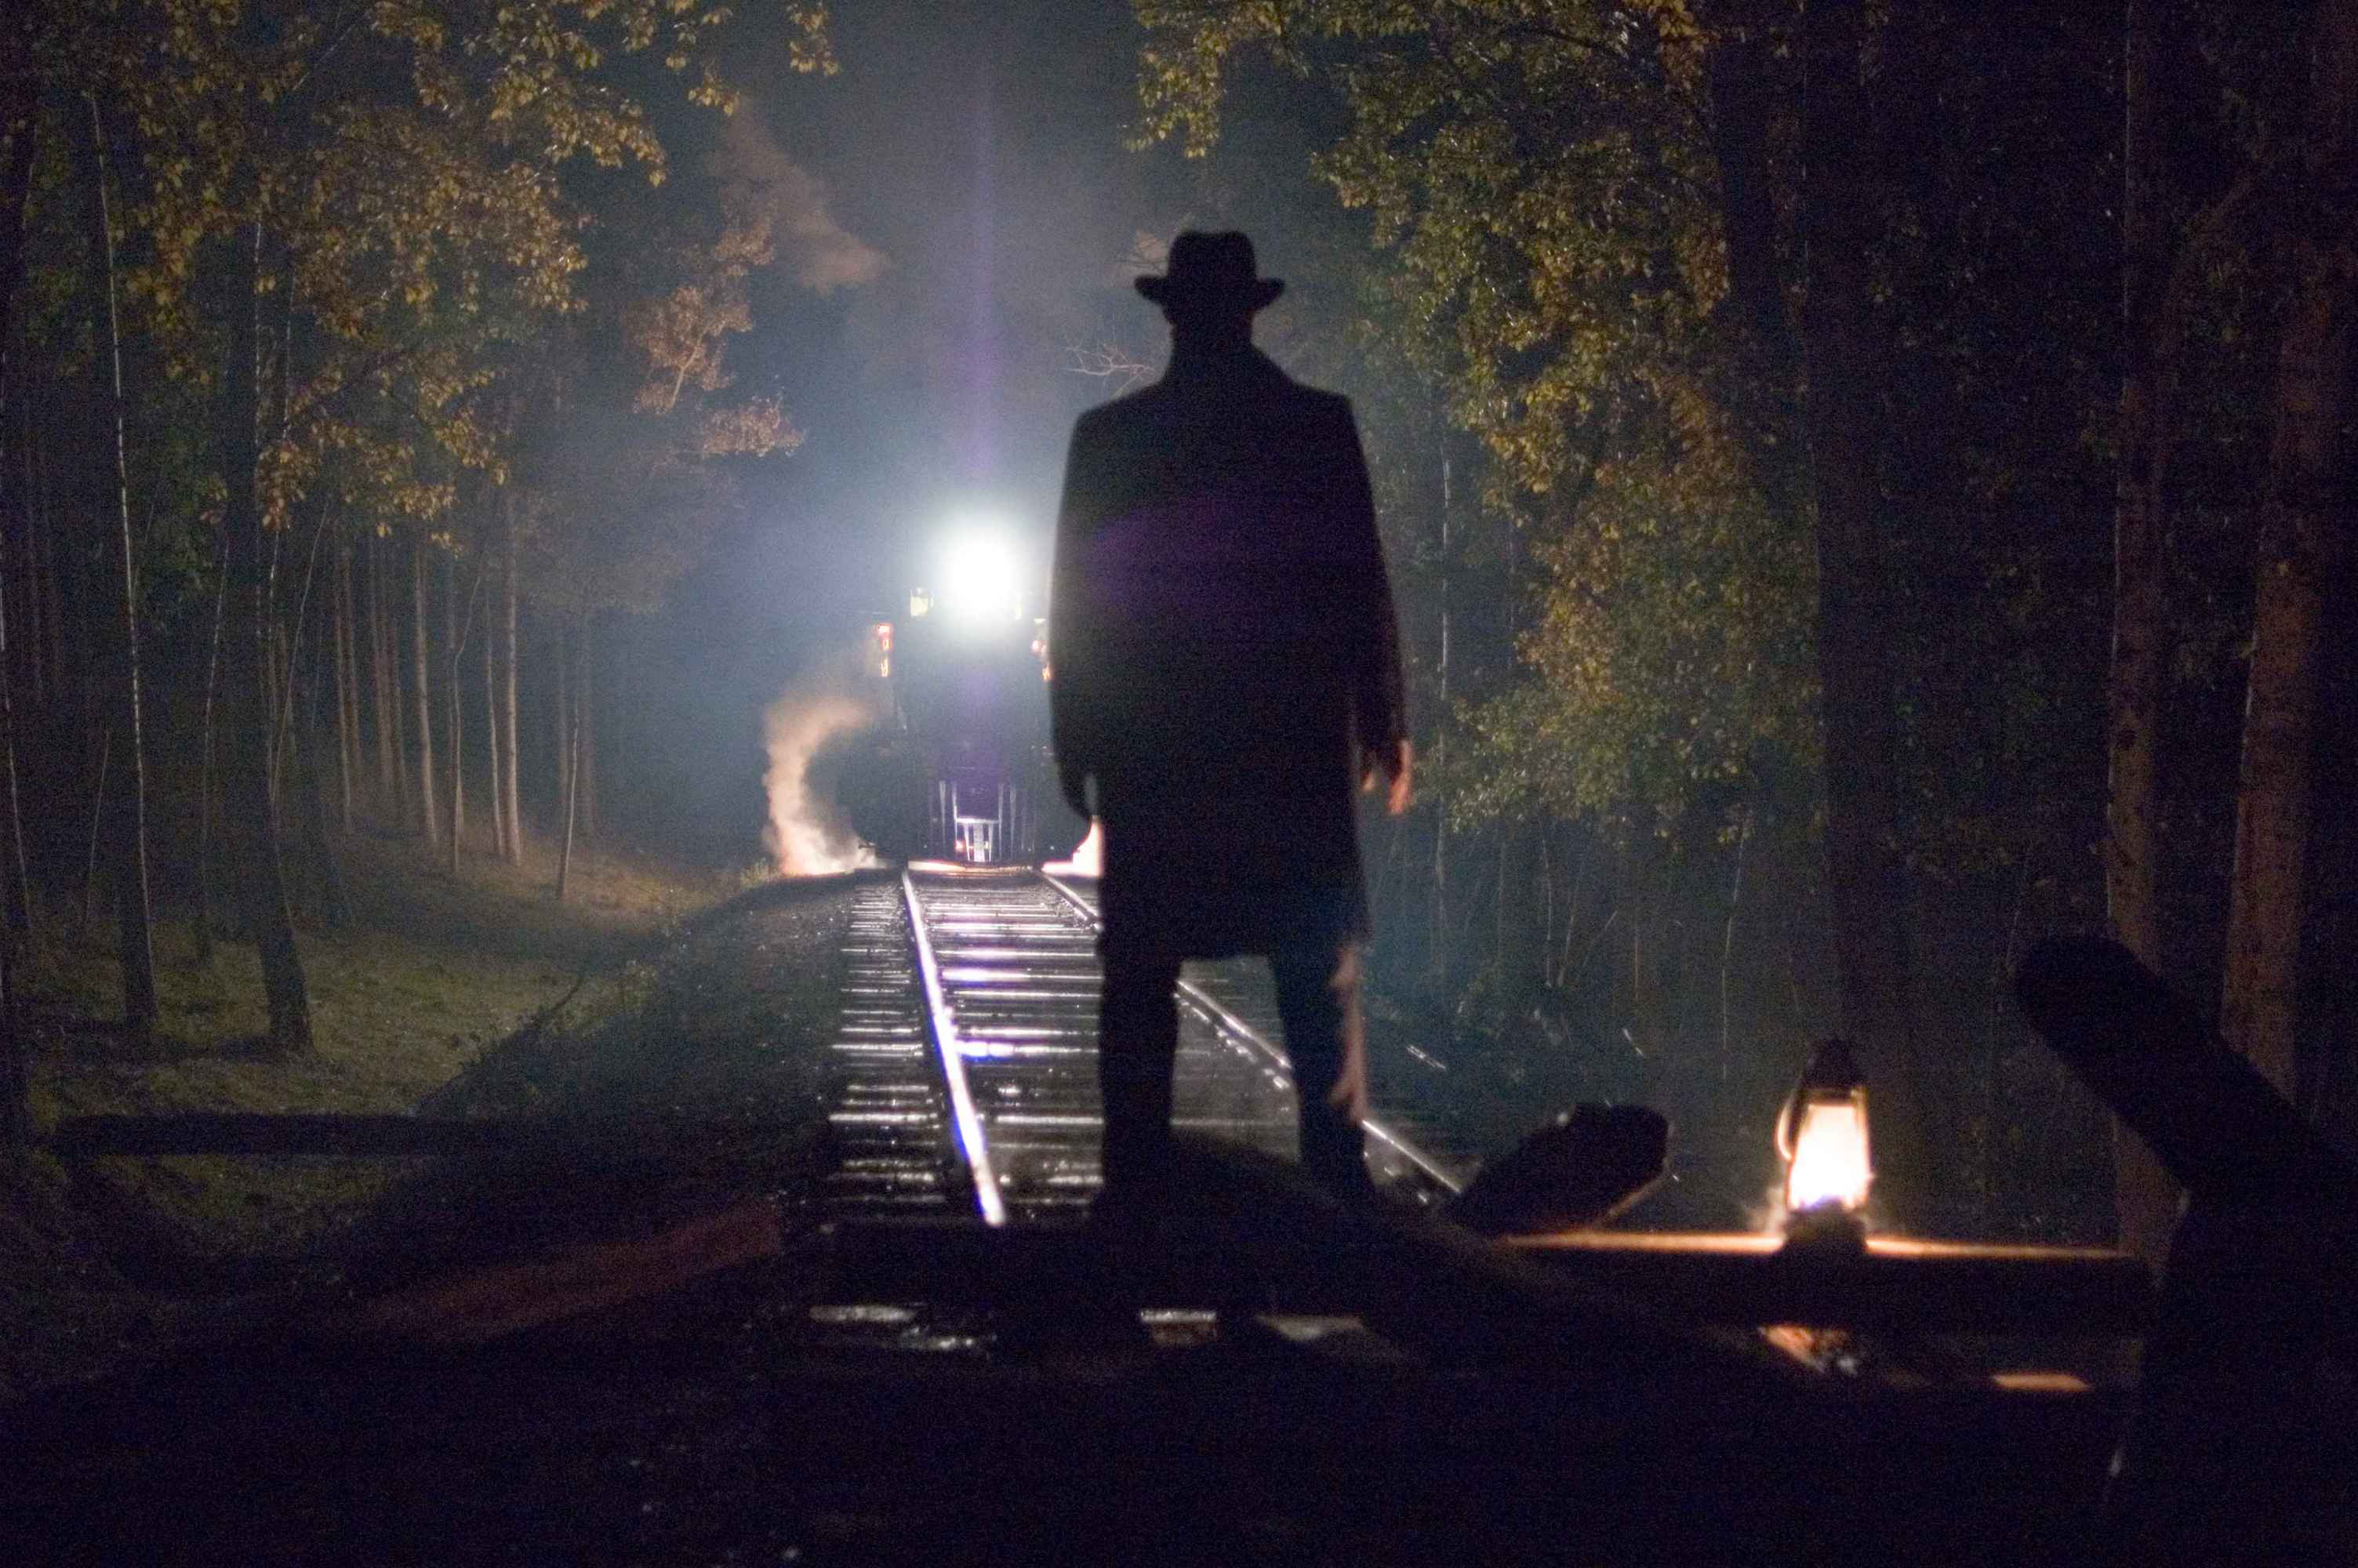 The Assassination Of Jesse James By The Coward Robert Ford #19